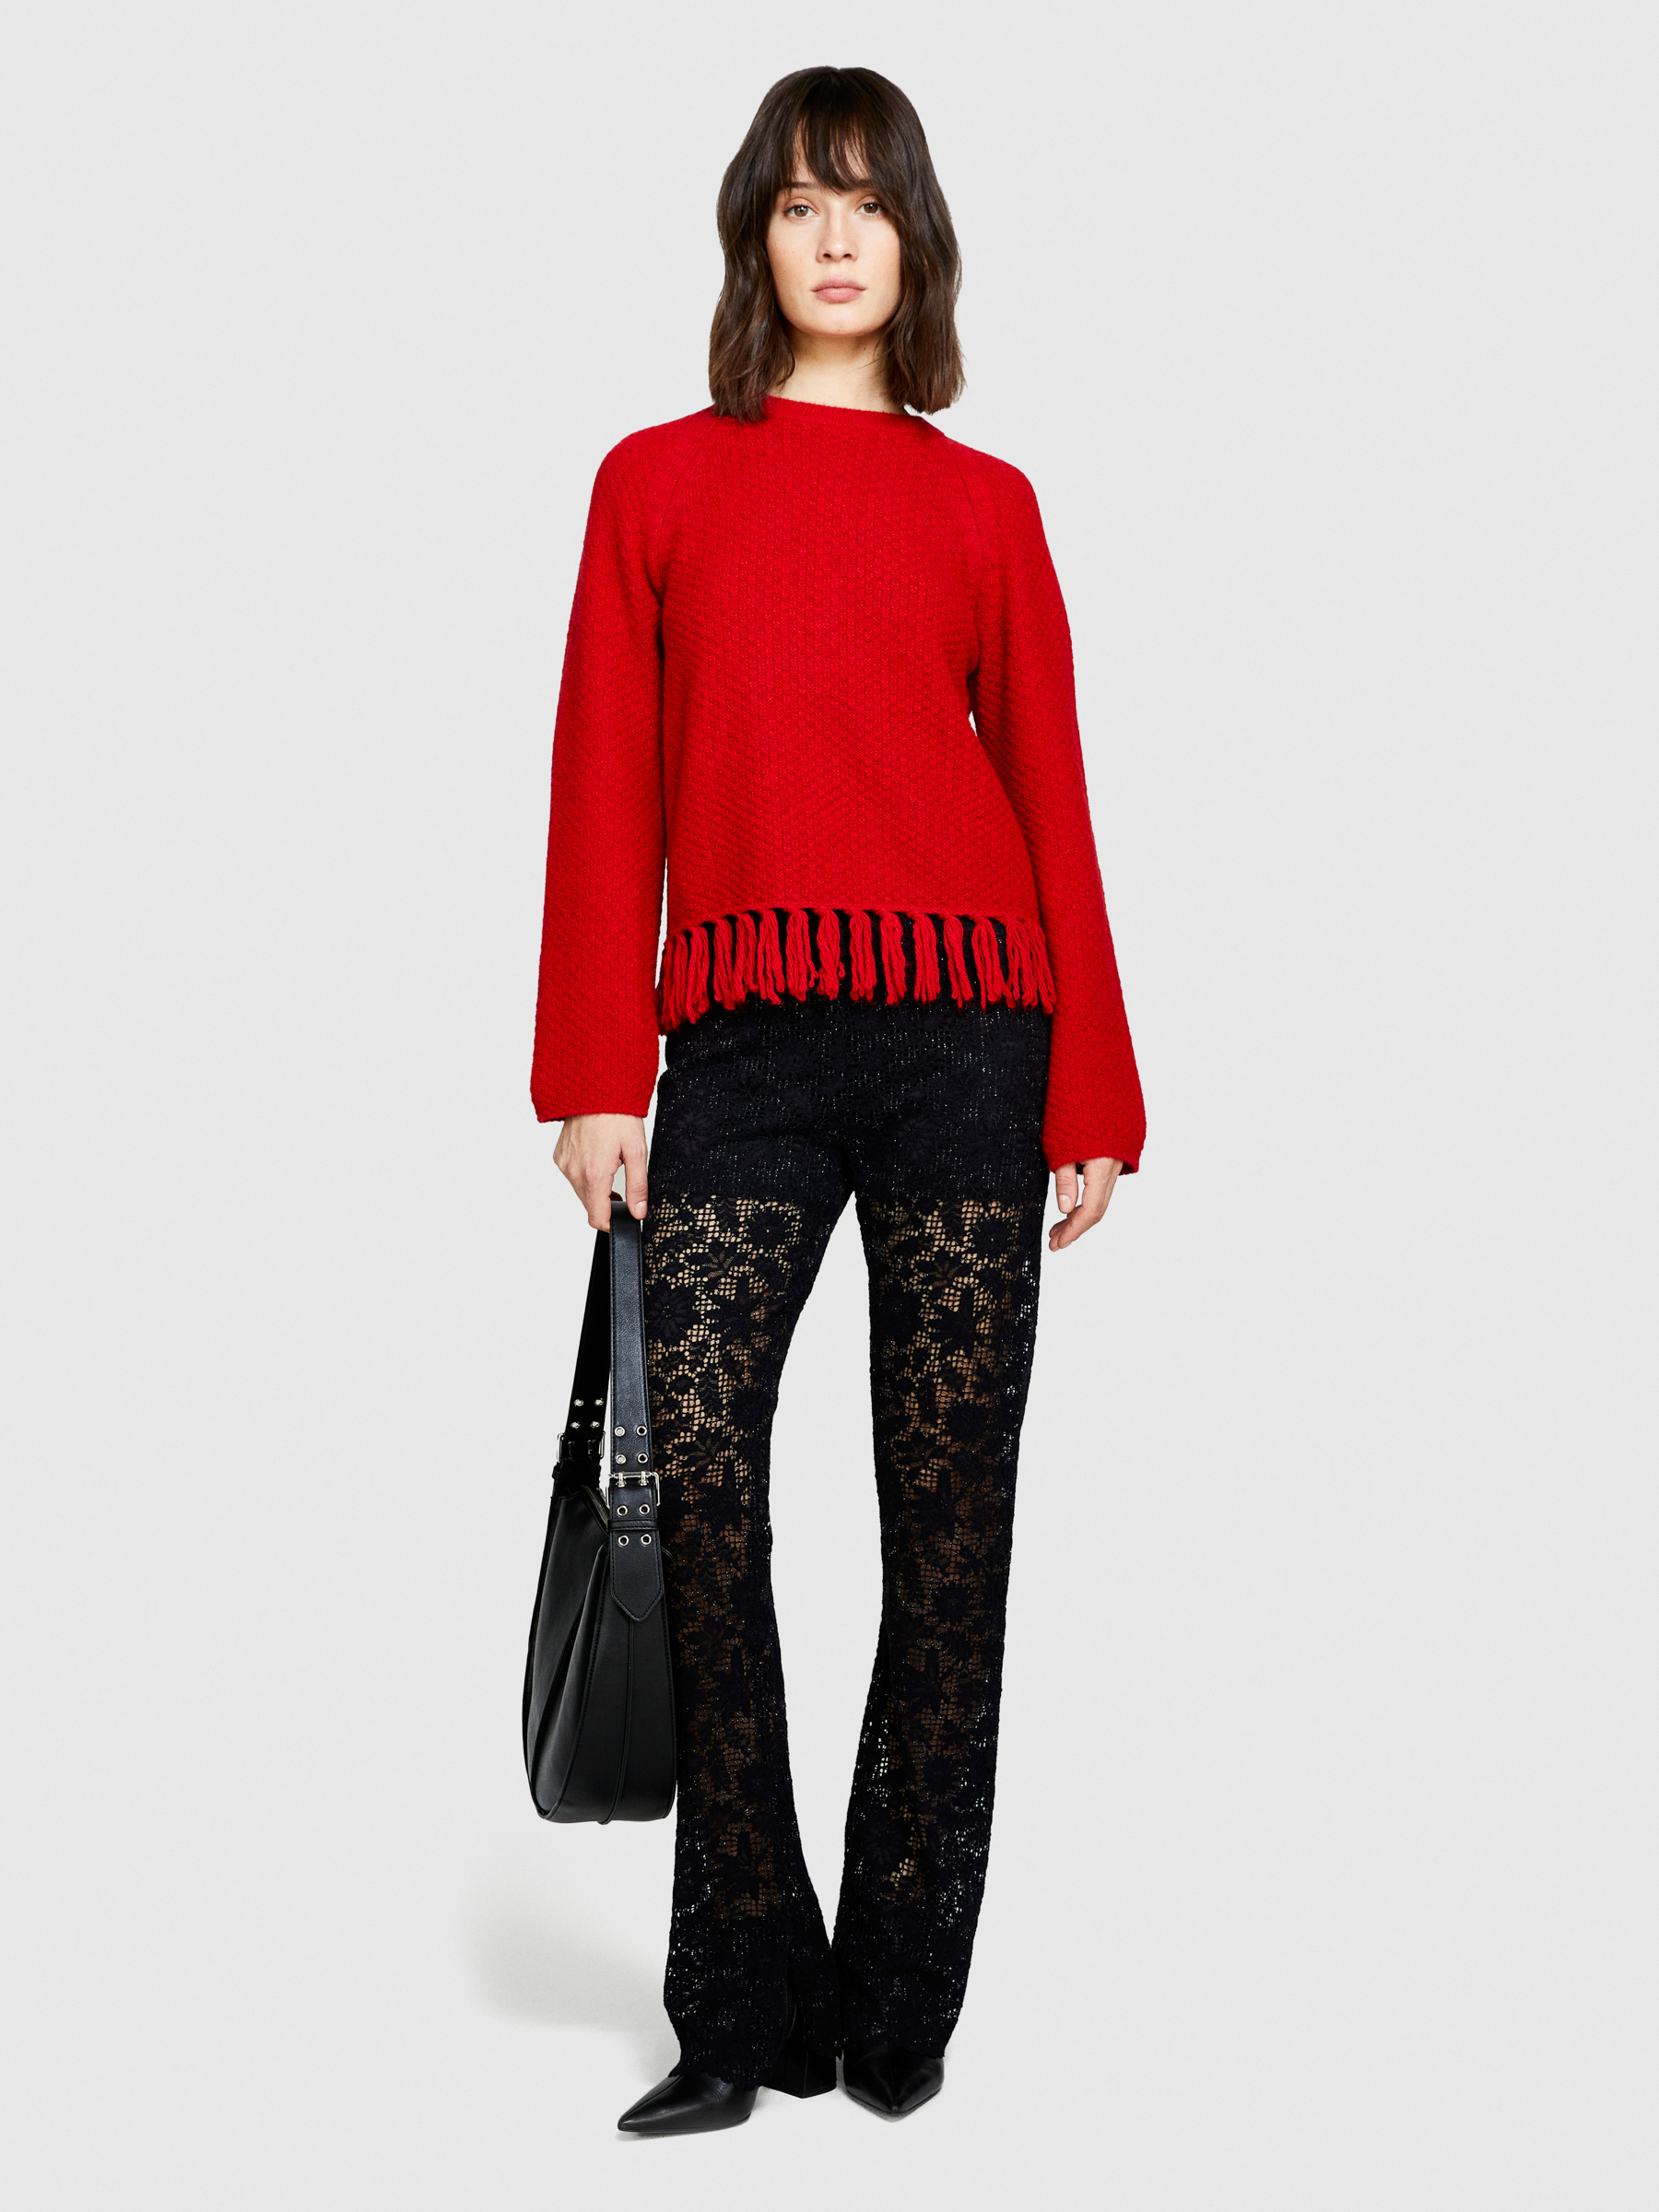 Sisley - Sweater With Fringe, Woman, Red, Size: M